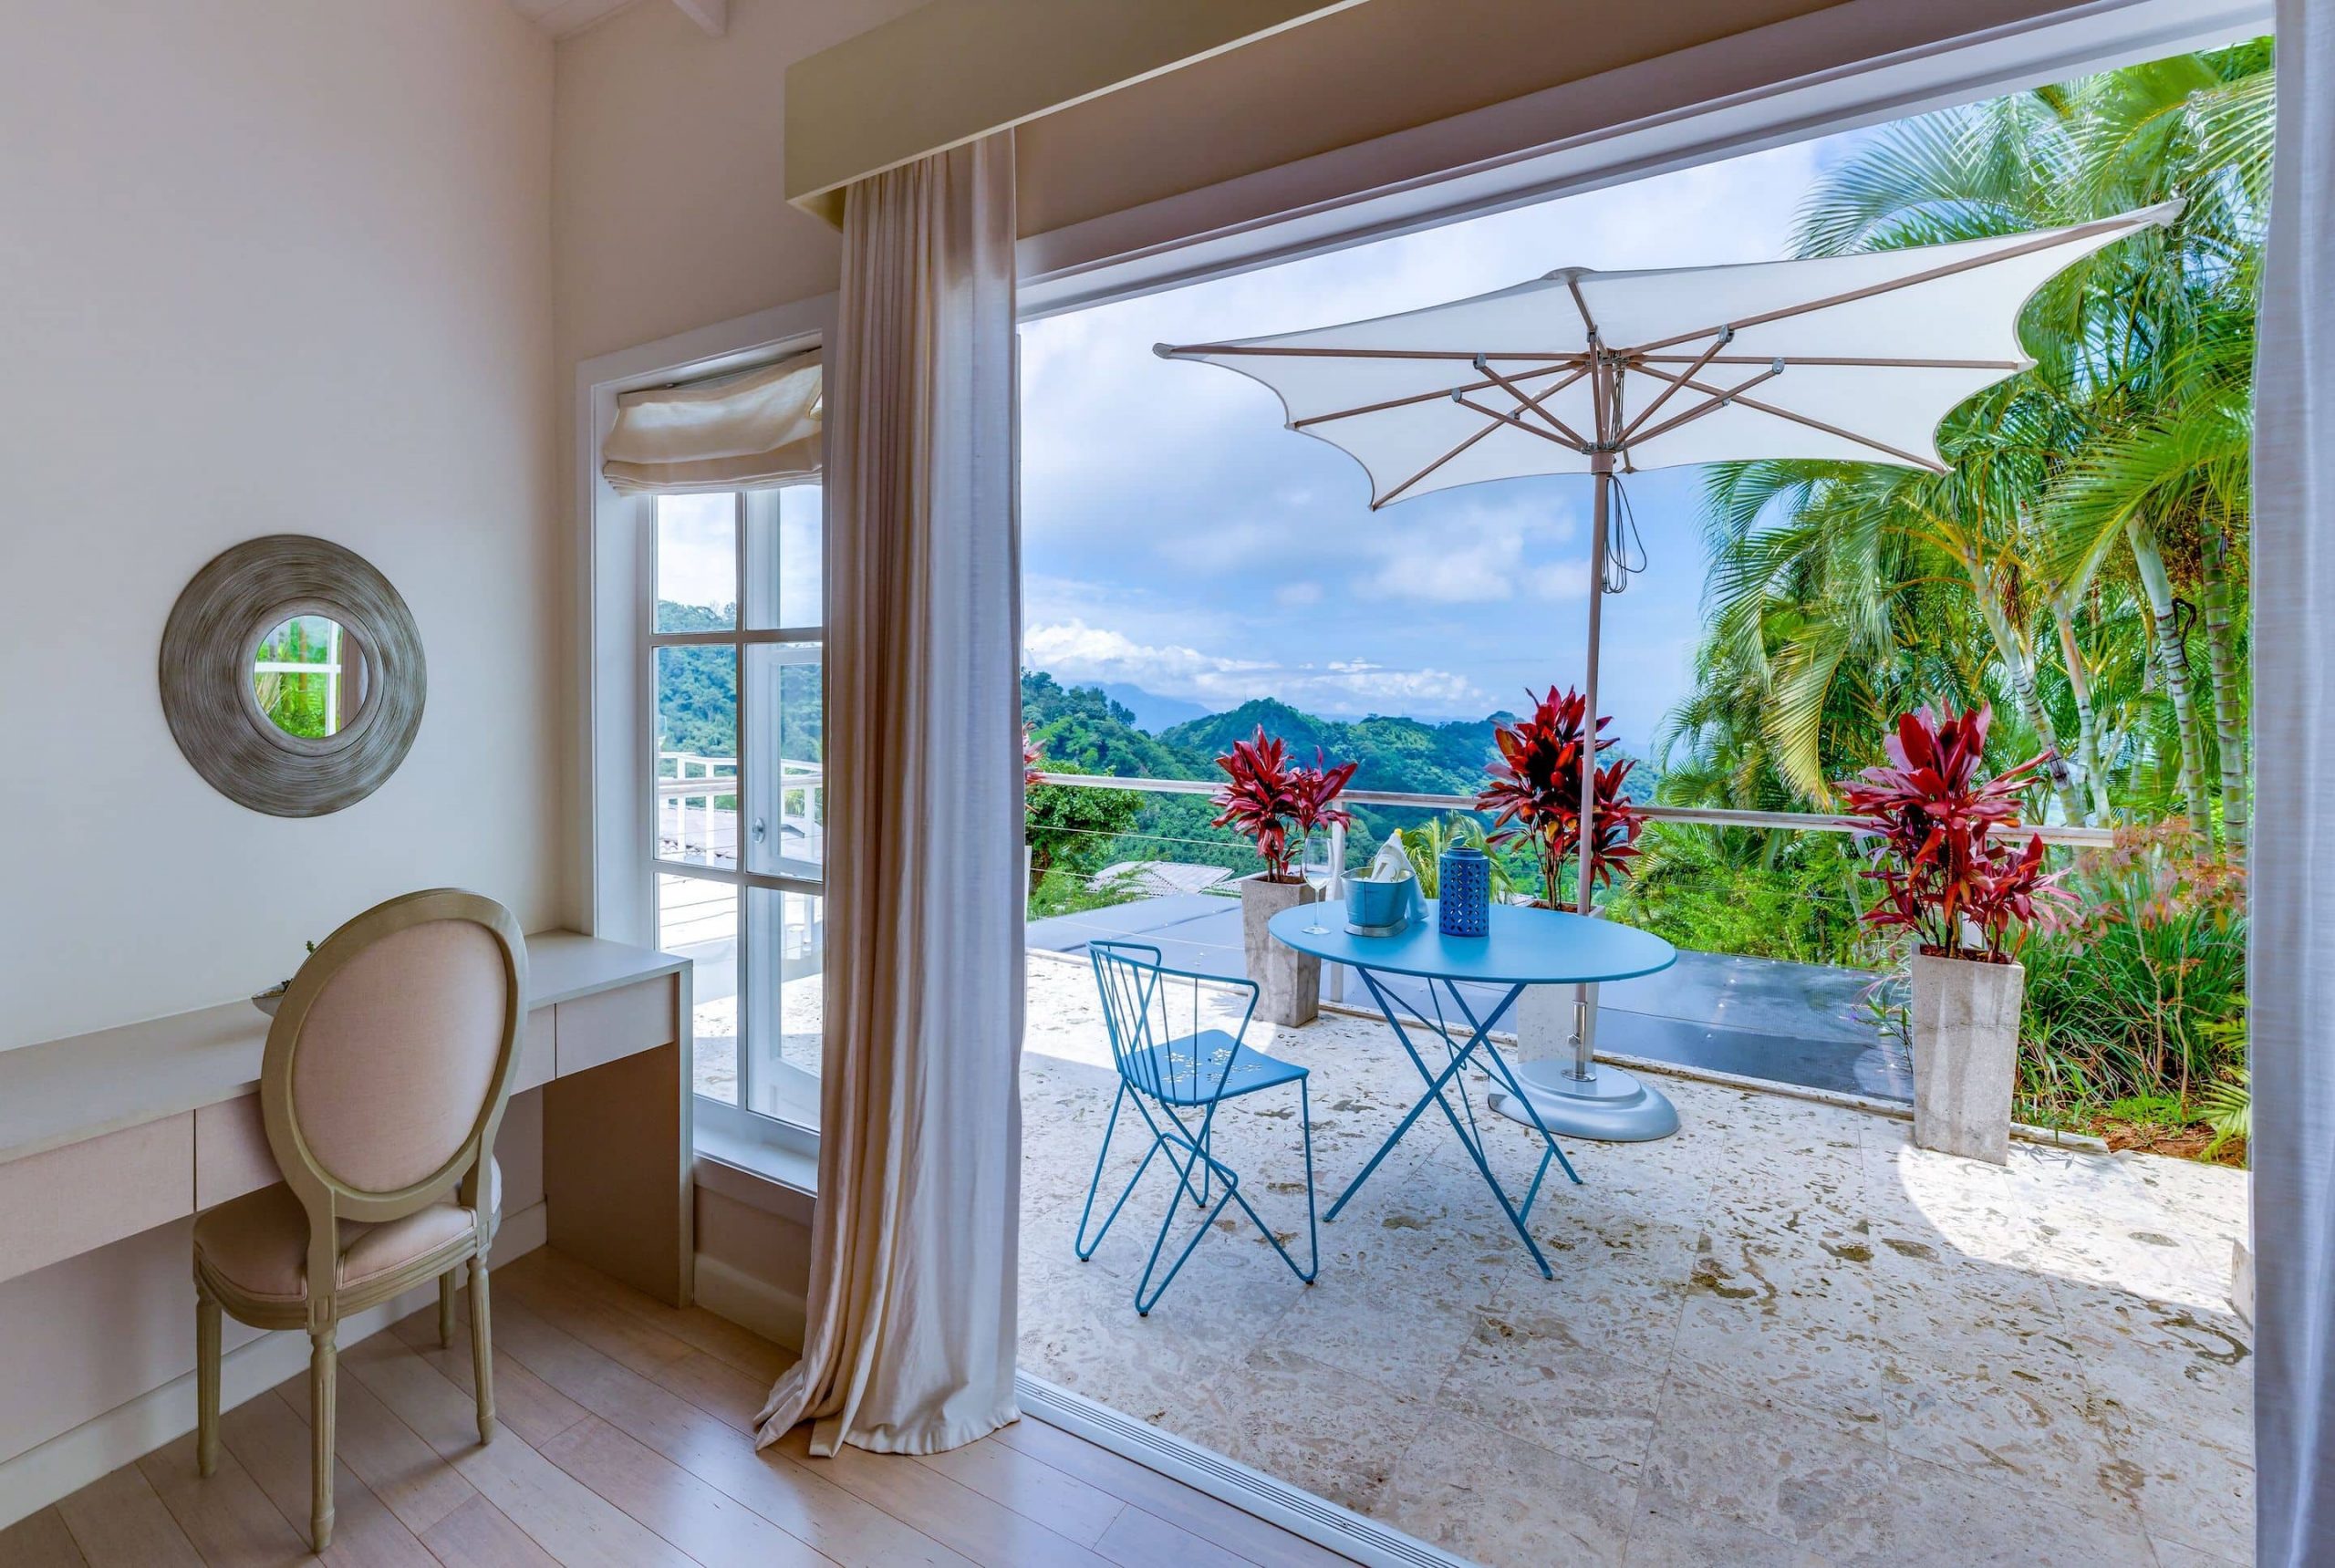 Beautiful decor accompanies guest rooms at The Retreat in Costa Rica, a premium yoga retreat experience with tropical plants and views all around.